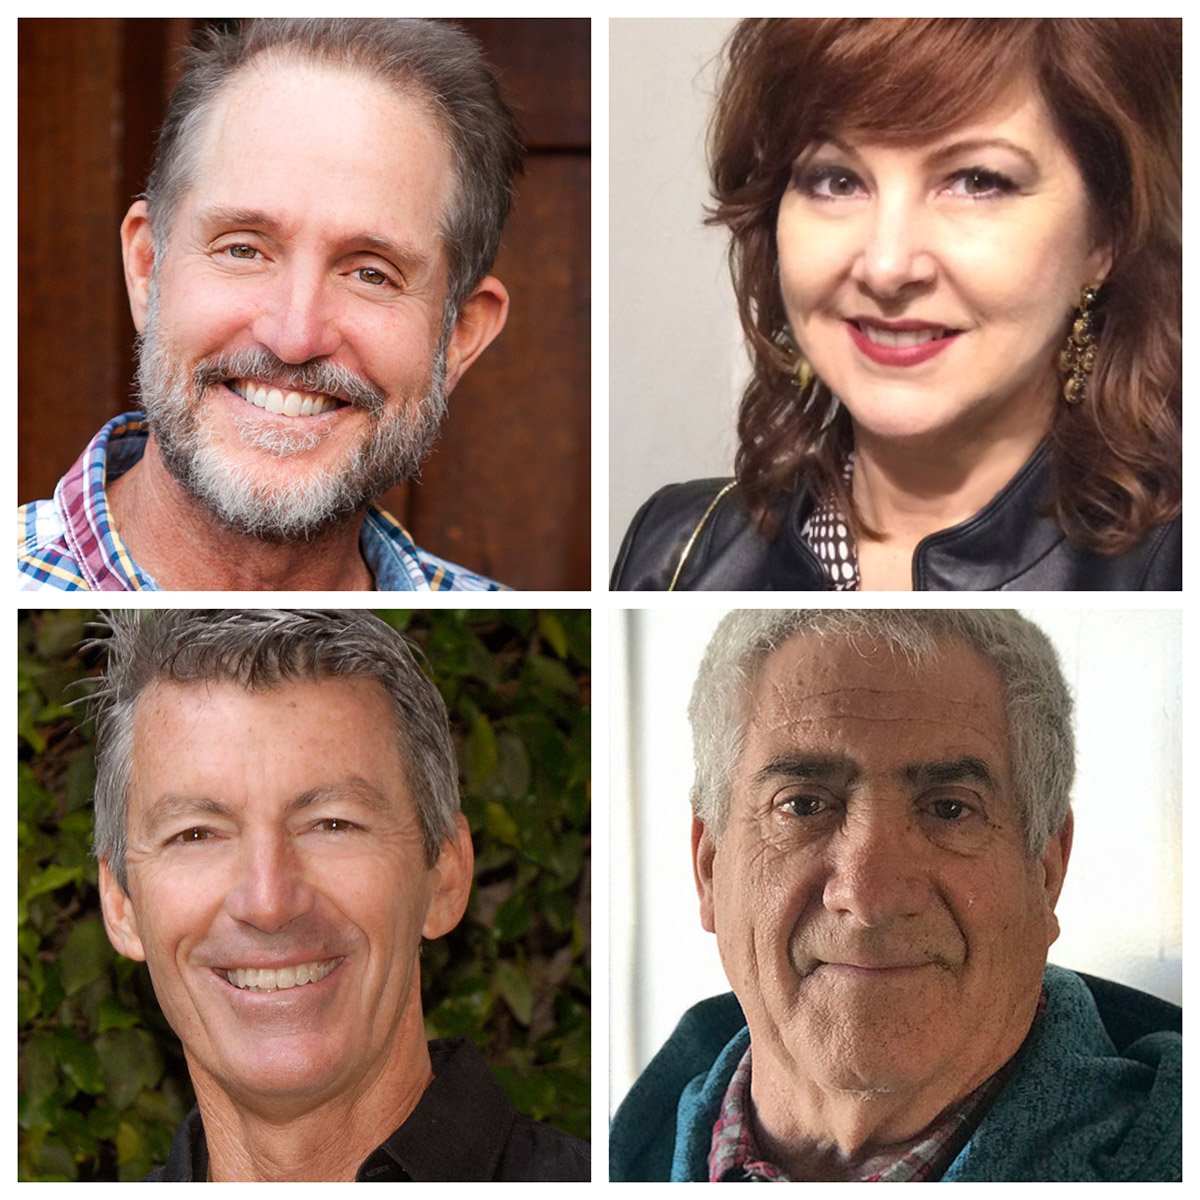 Join us today at 1pm for our very first Art Talk of 2018! Today's topic features landscape painters @WendyWirth @LaRockFineArt #gildellinger #michaelobermeyer Can't make it to Laguna Beach today? Watch live on Facebook at facebook.com/festivalpageant